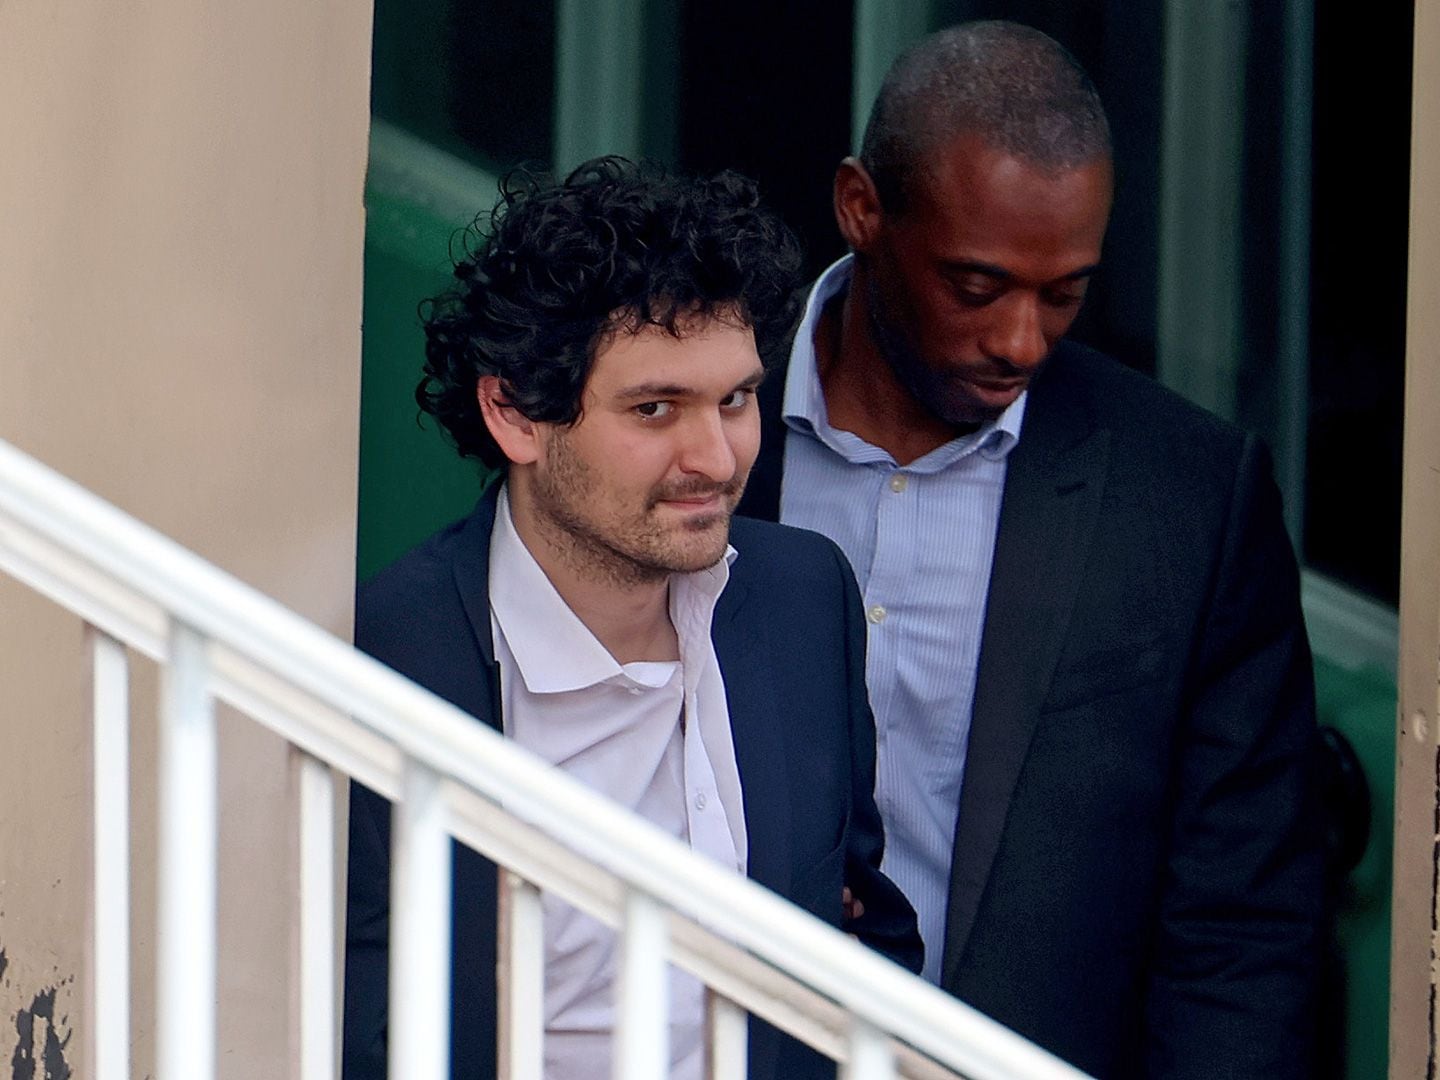 FTX co-founder Sam Bankman-Fried is escorted out of the Magistrate's Court on December 21, 2022 in Nassau, Bahamas. (Joe Raedle/Getty Images)